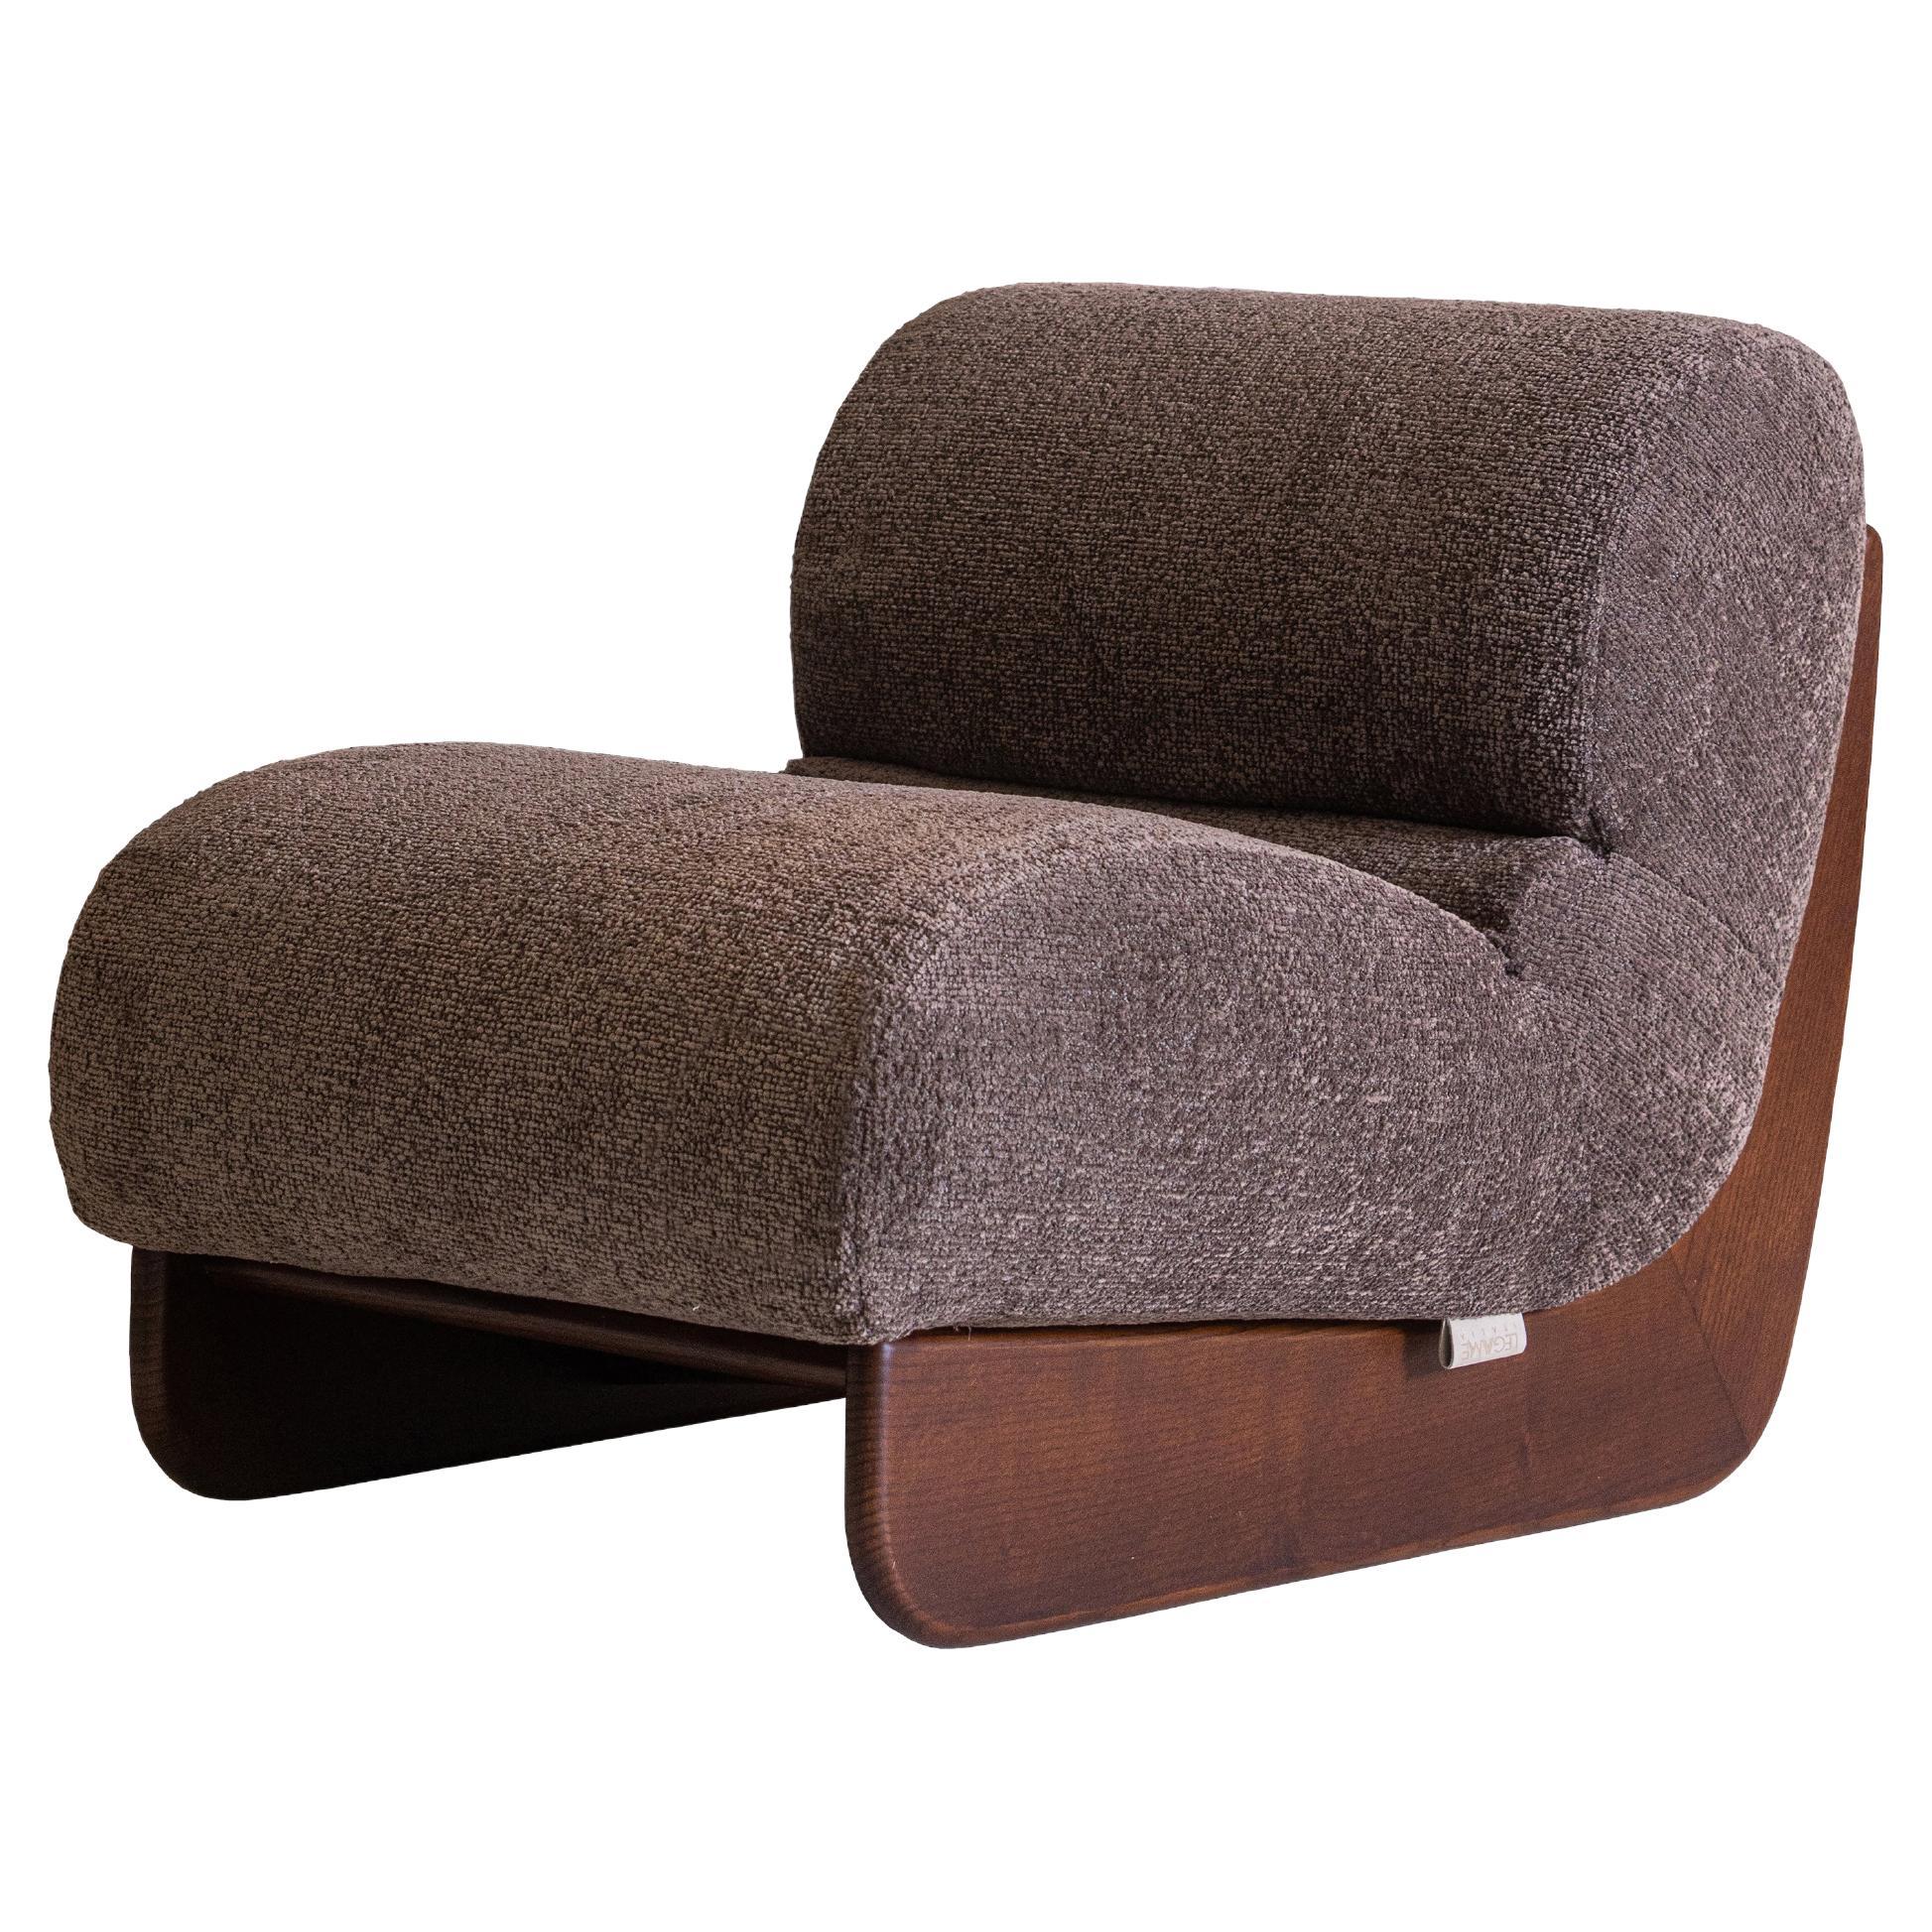 OVUNQUE armchair in taupe fabric. Ash wood base. By Legame Italia For Sale